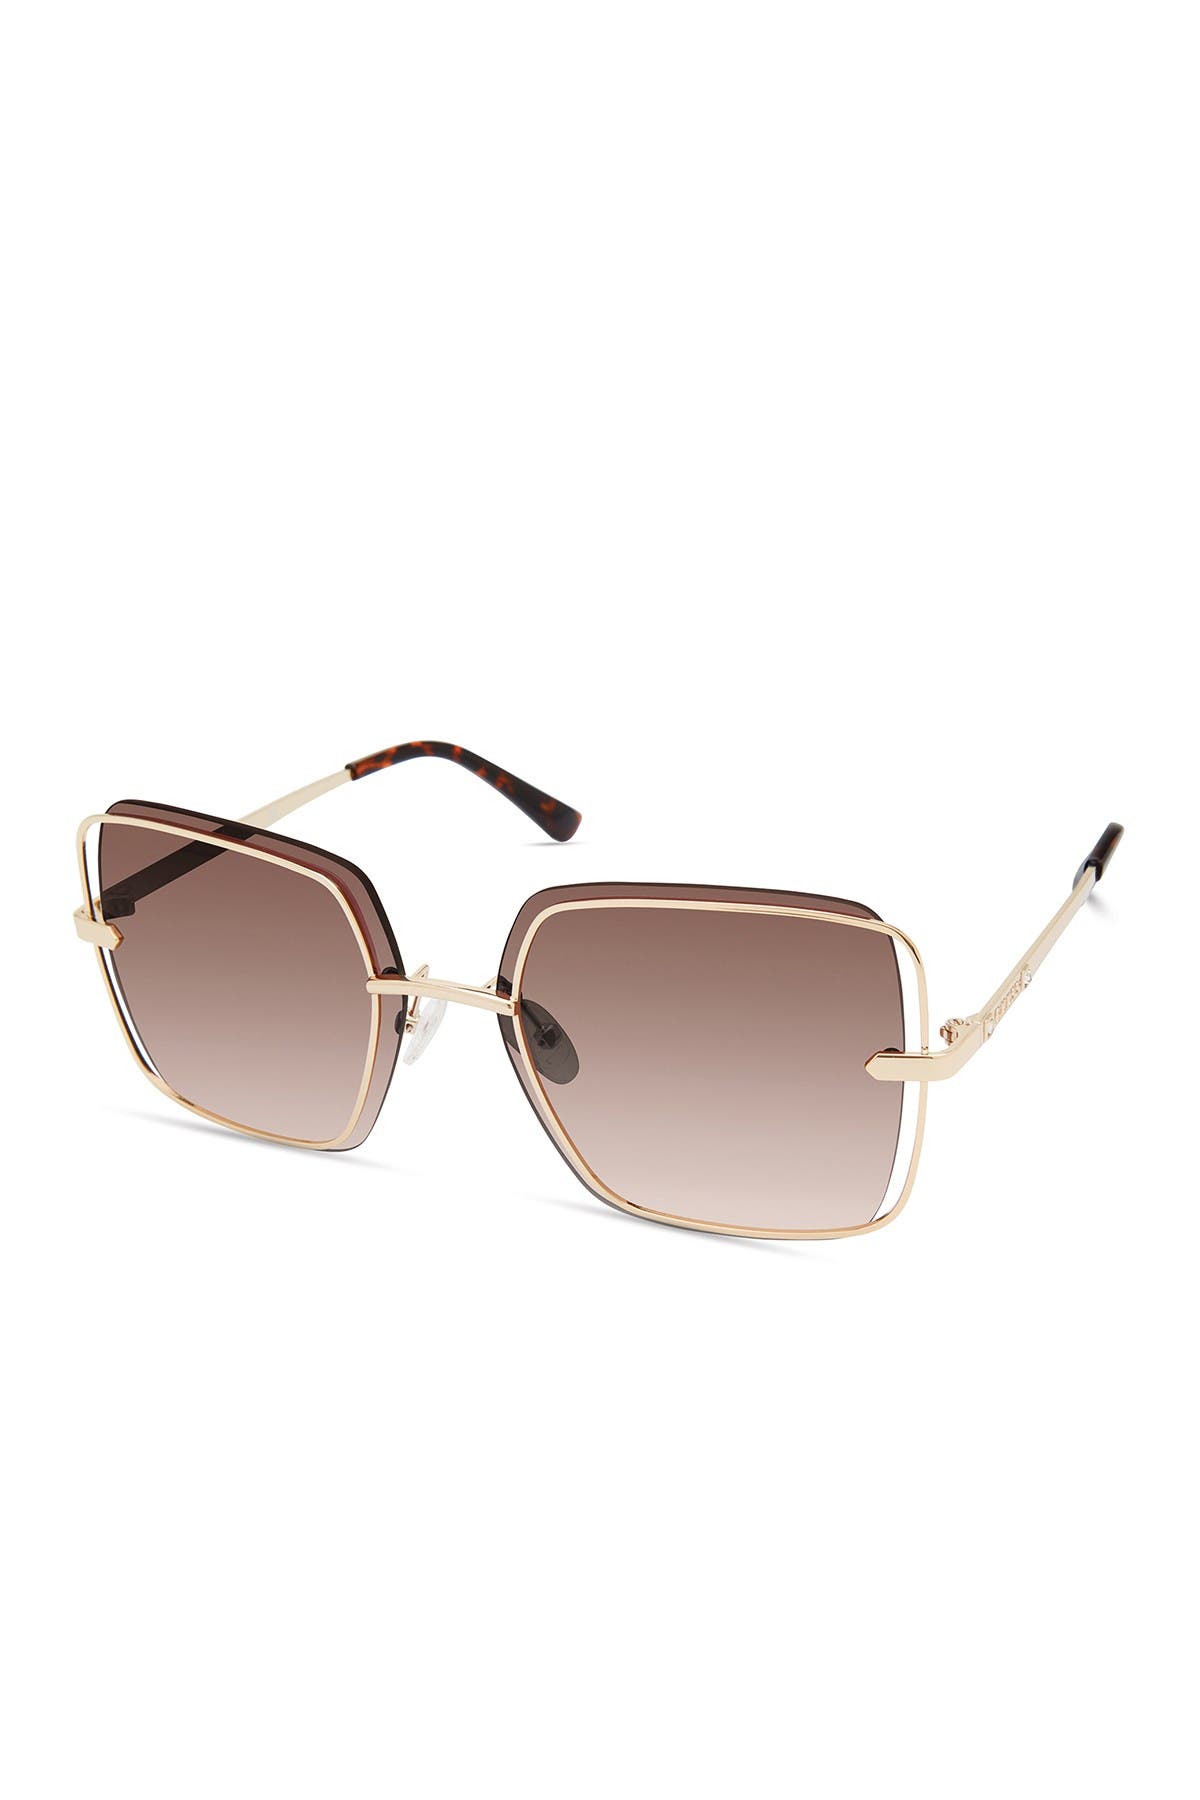 Guess Butterfly 60mm Sunglasses In Gldo/brng